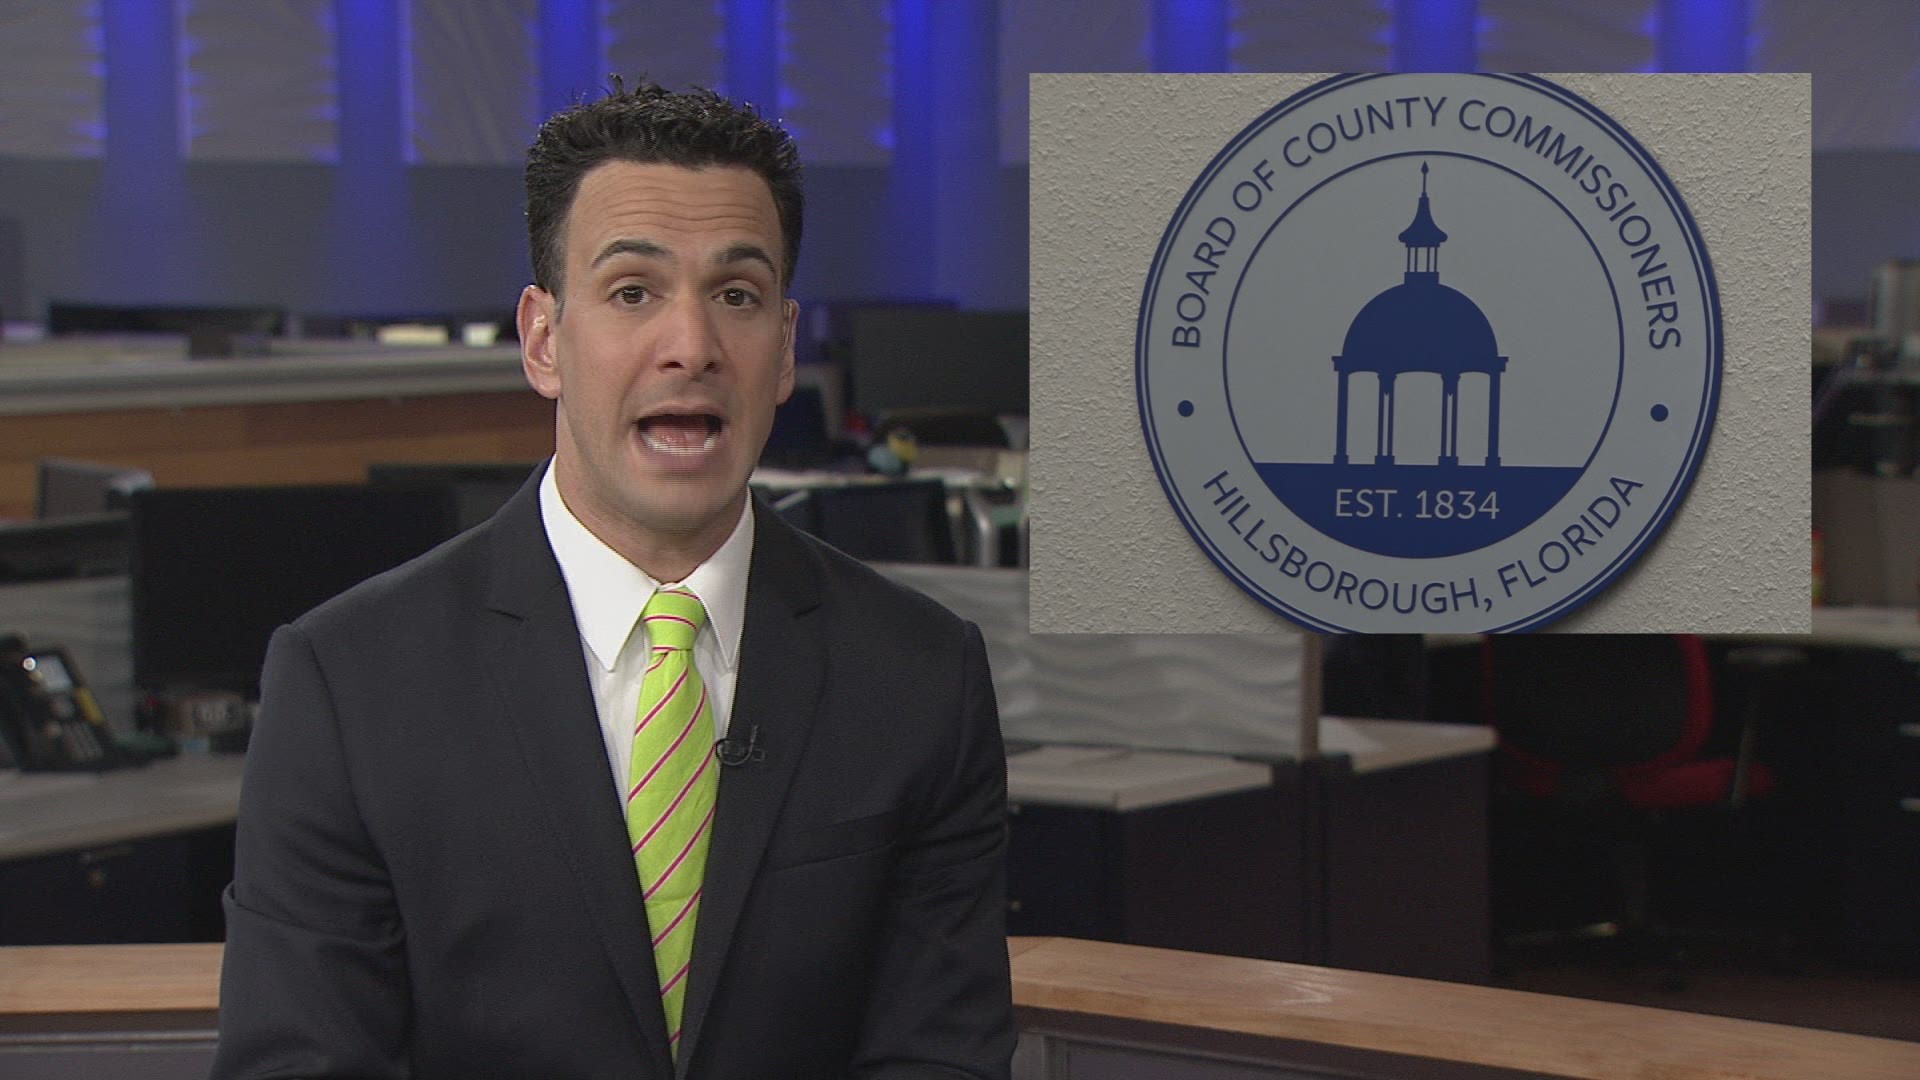 You won't believe this Hillsborough County's politician's reaction to 10Investigates' Noah Pransky when asked about about the multi-million dollar tax deals, like a proposed Rays stadium in Ybor City.